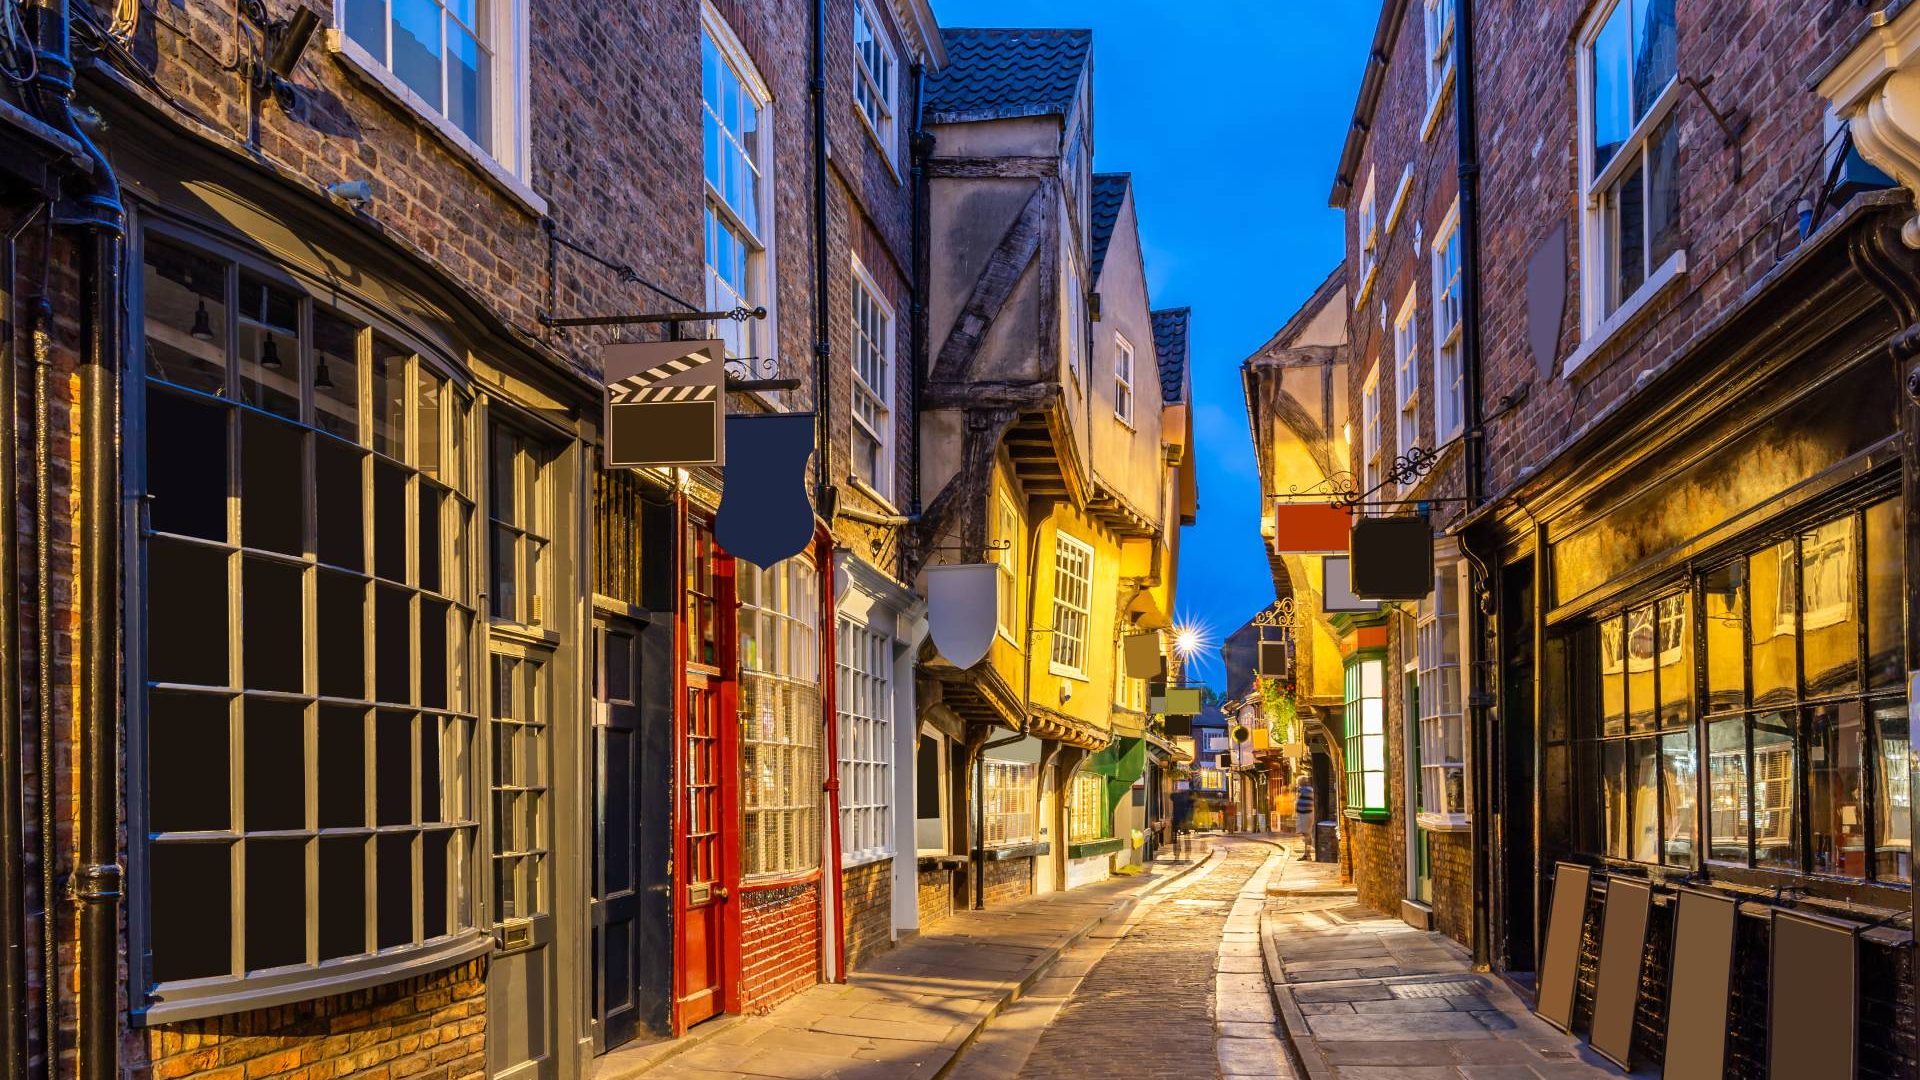 A narrow road lined with shops in the city of York at night